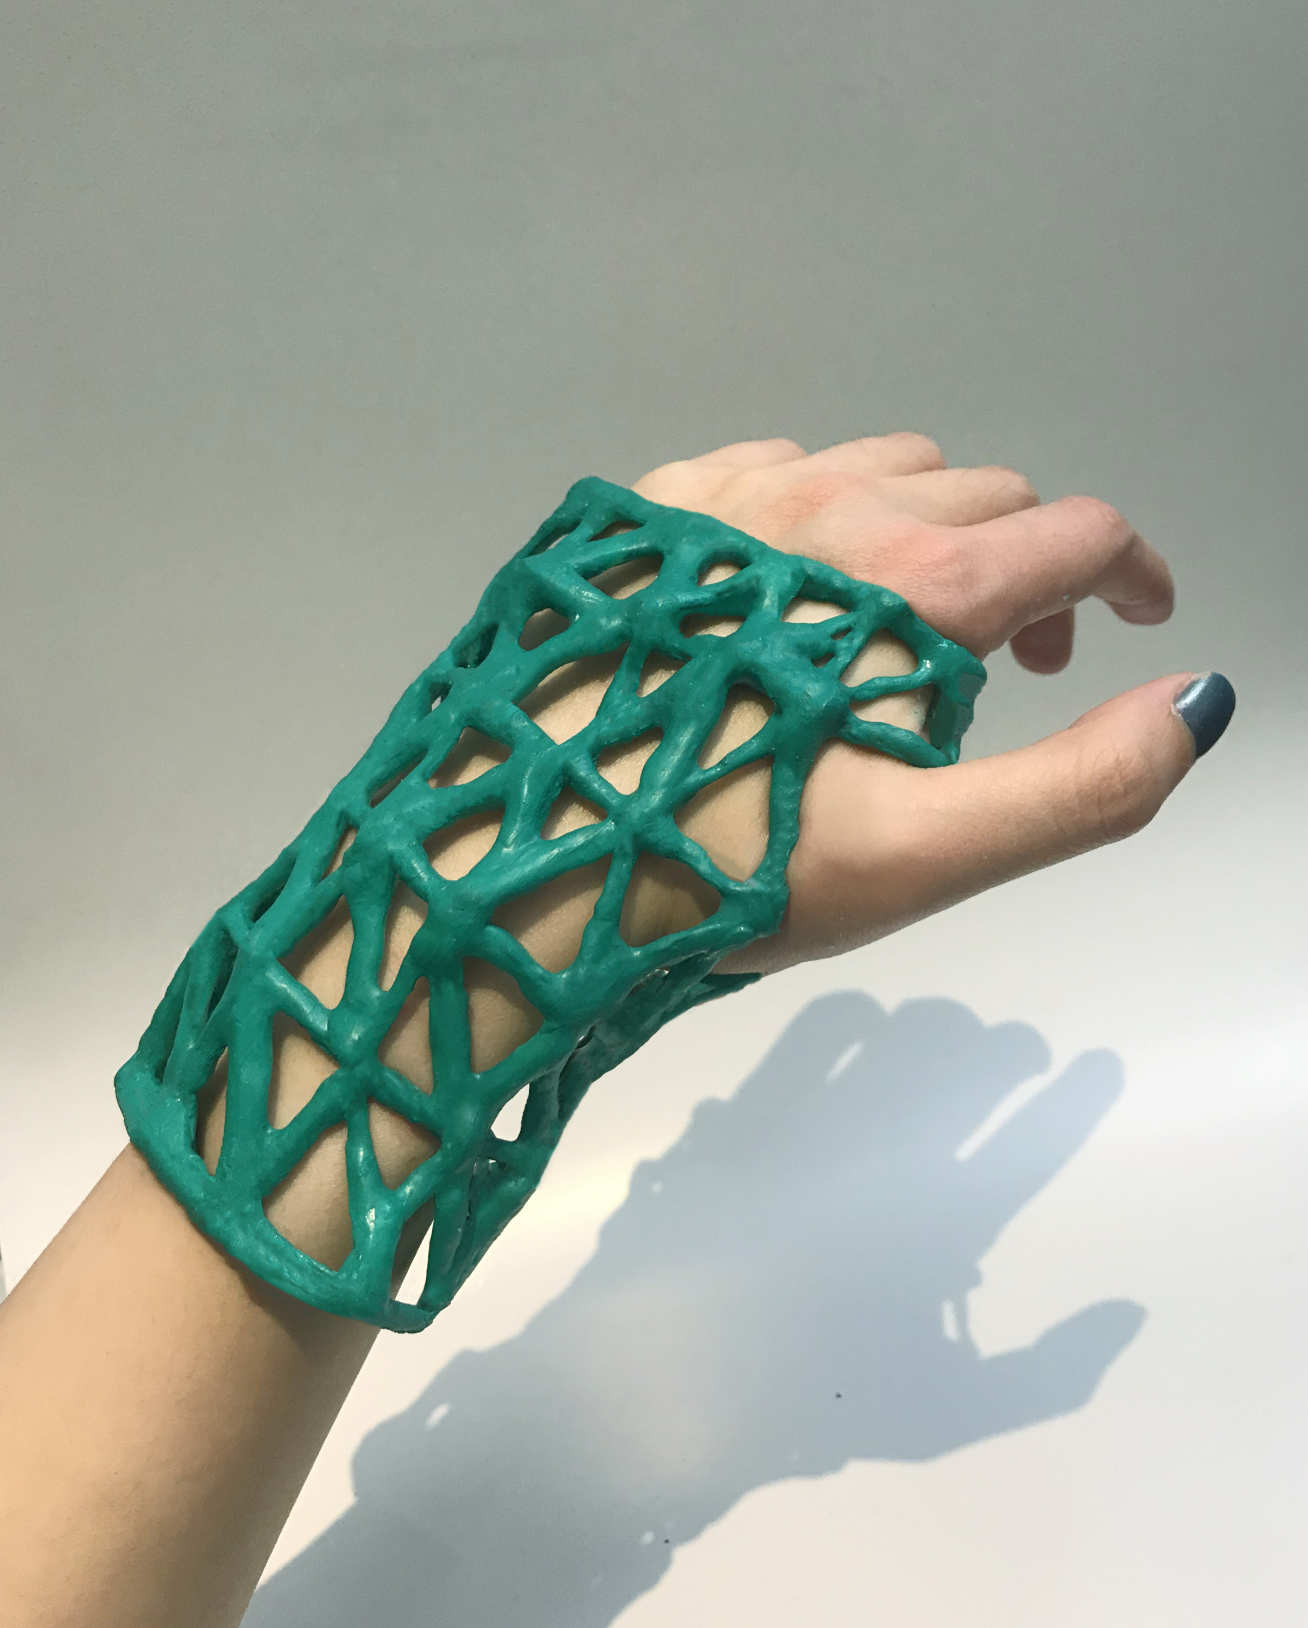 Next-generation washable cast for broken limbs wins WE Innovate top ...